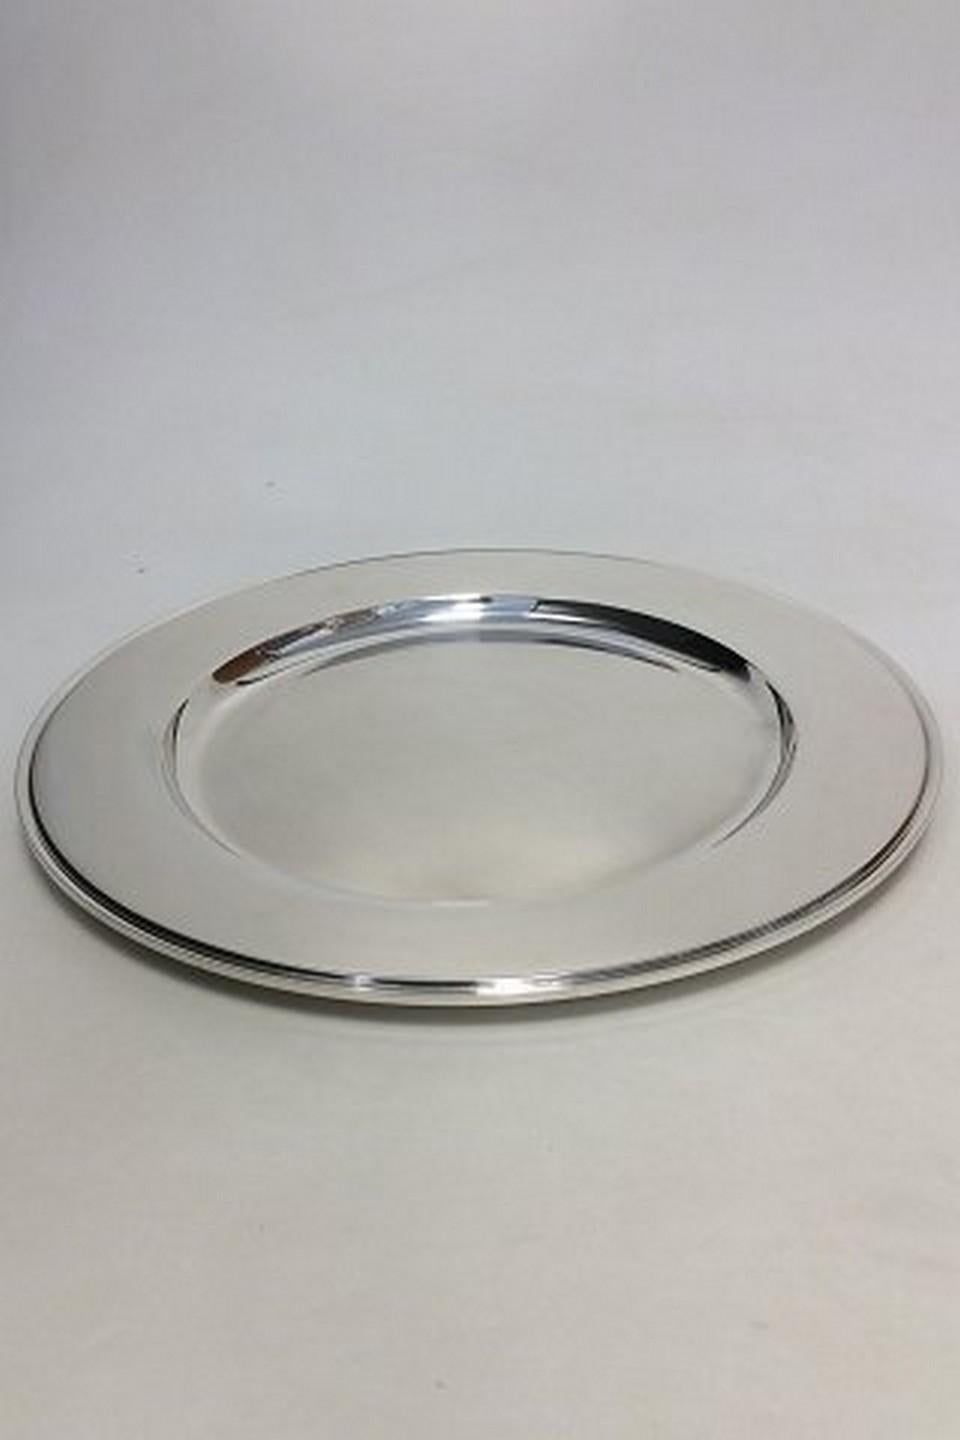 Georg Jensen sterling silver pyramid round tray no 600 M.

Designed by Harald Nielsen

Measures 40cm / 15 5/8